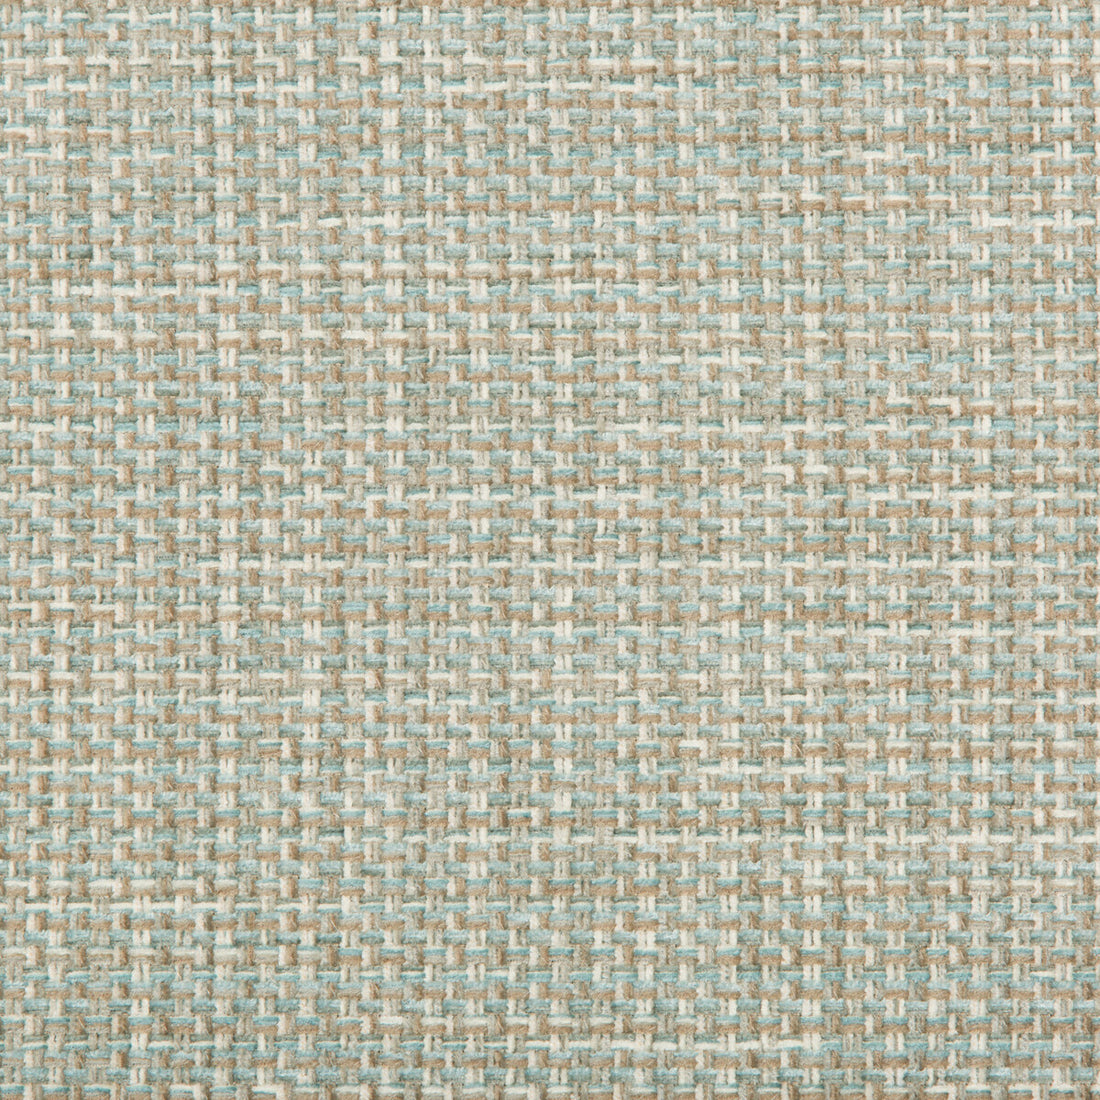 Westhigh fabric in spa color - pattern 35305.316.0 - by Kravet Basics in the Greenwich collection